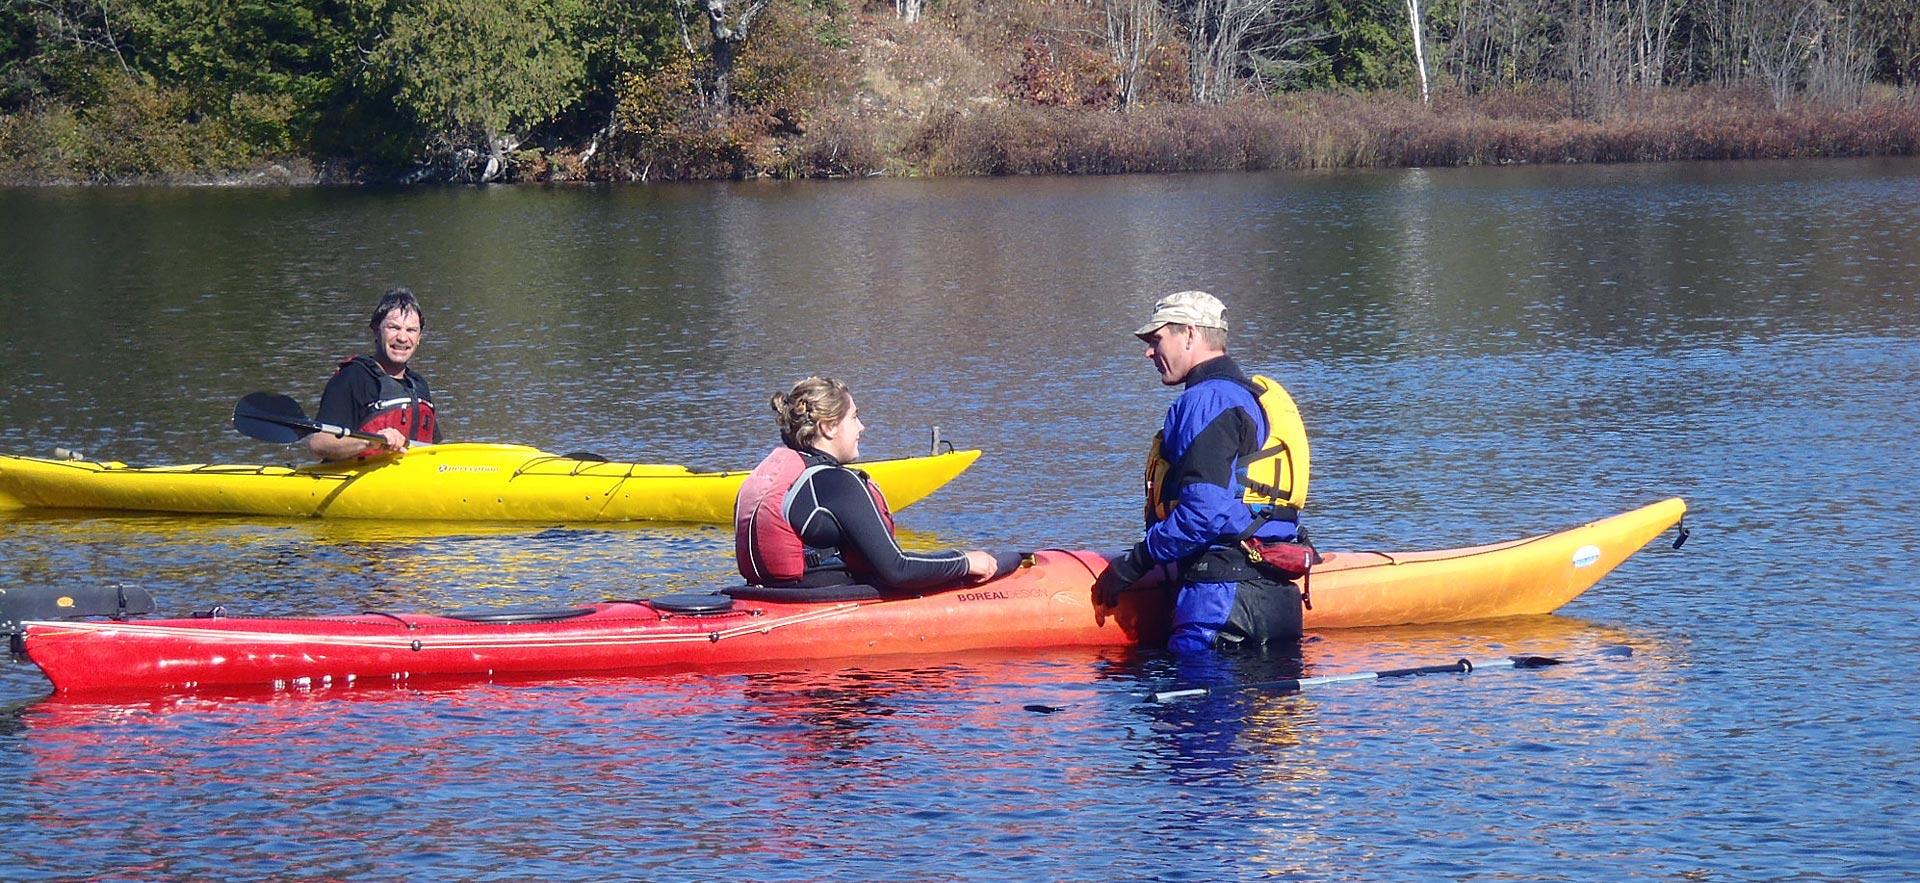 Male Adventure Recreation instructor teaches safety on a kayak.